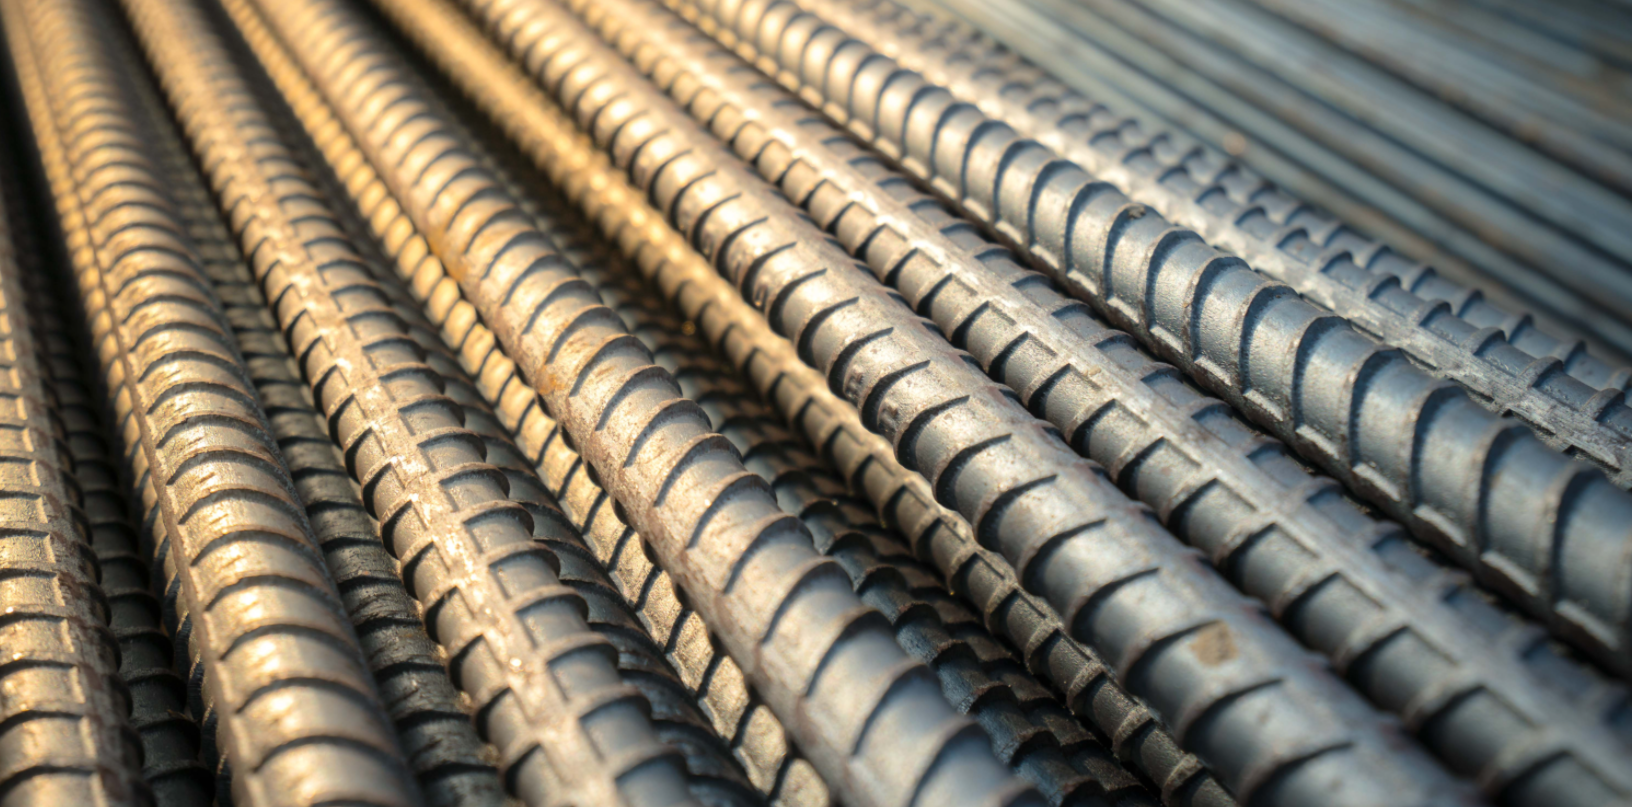 Russian metallurgical giants and the Ministry of Industry and Trade agreed to curb prices for rebar